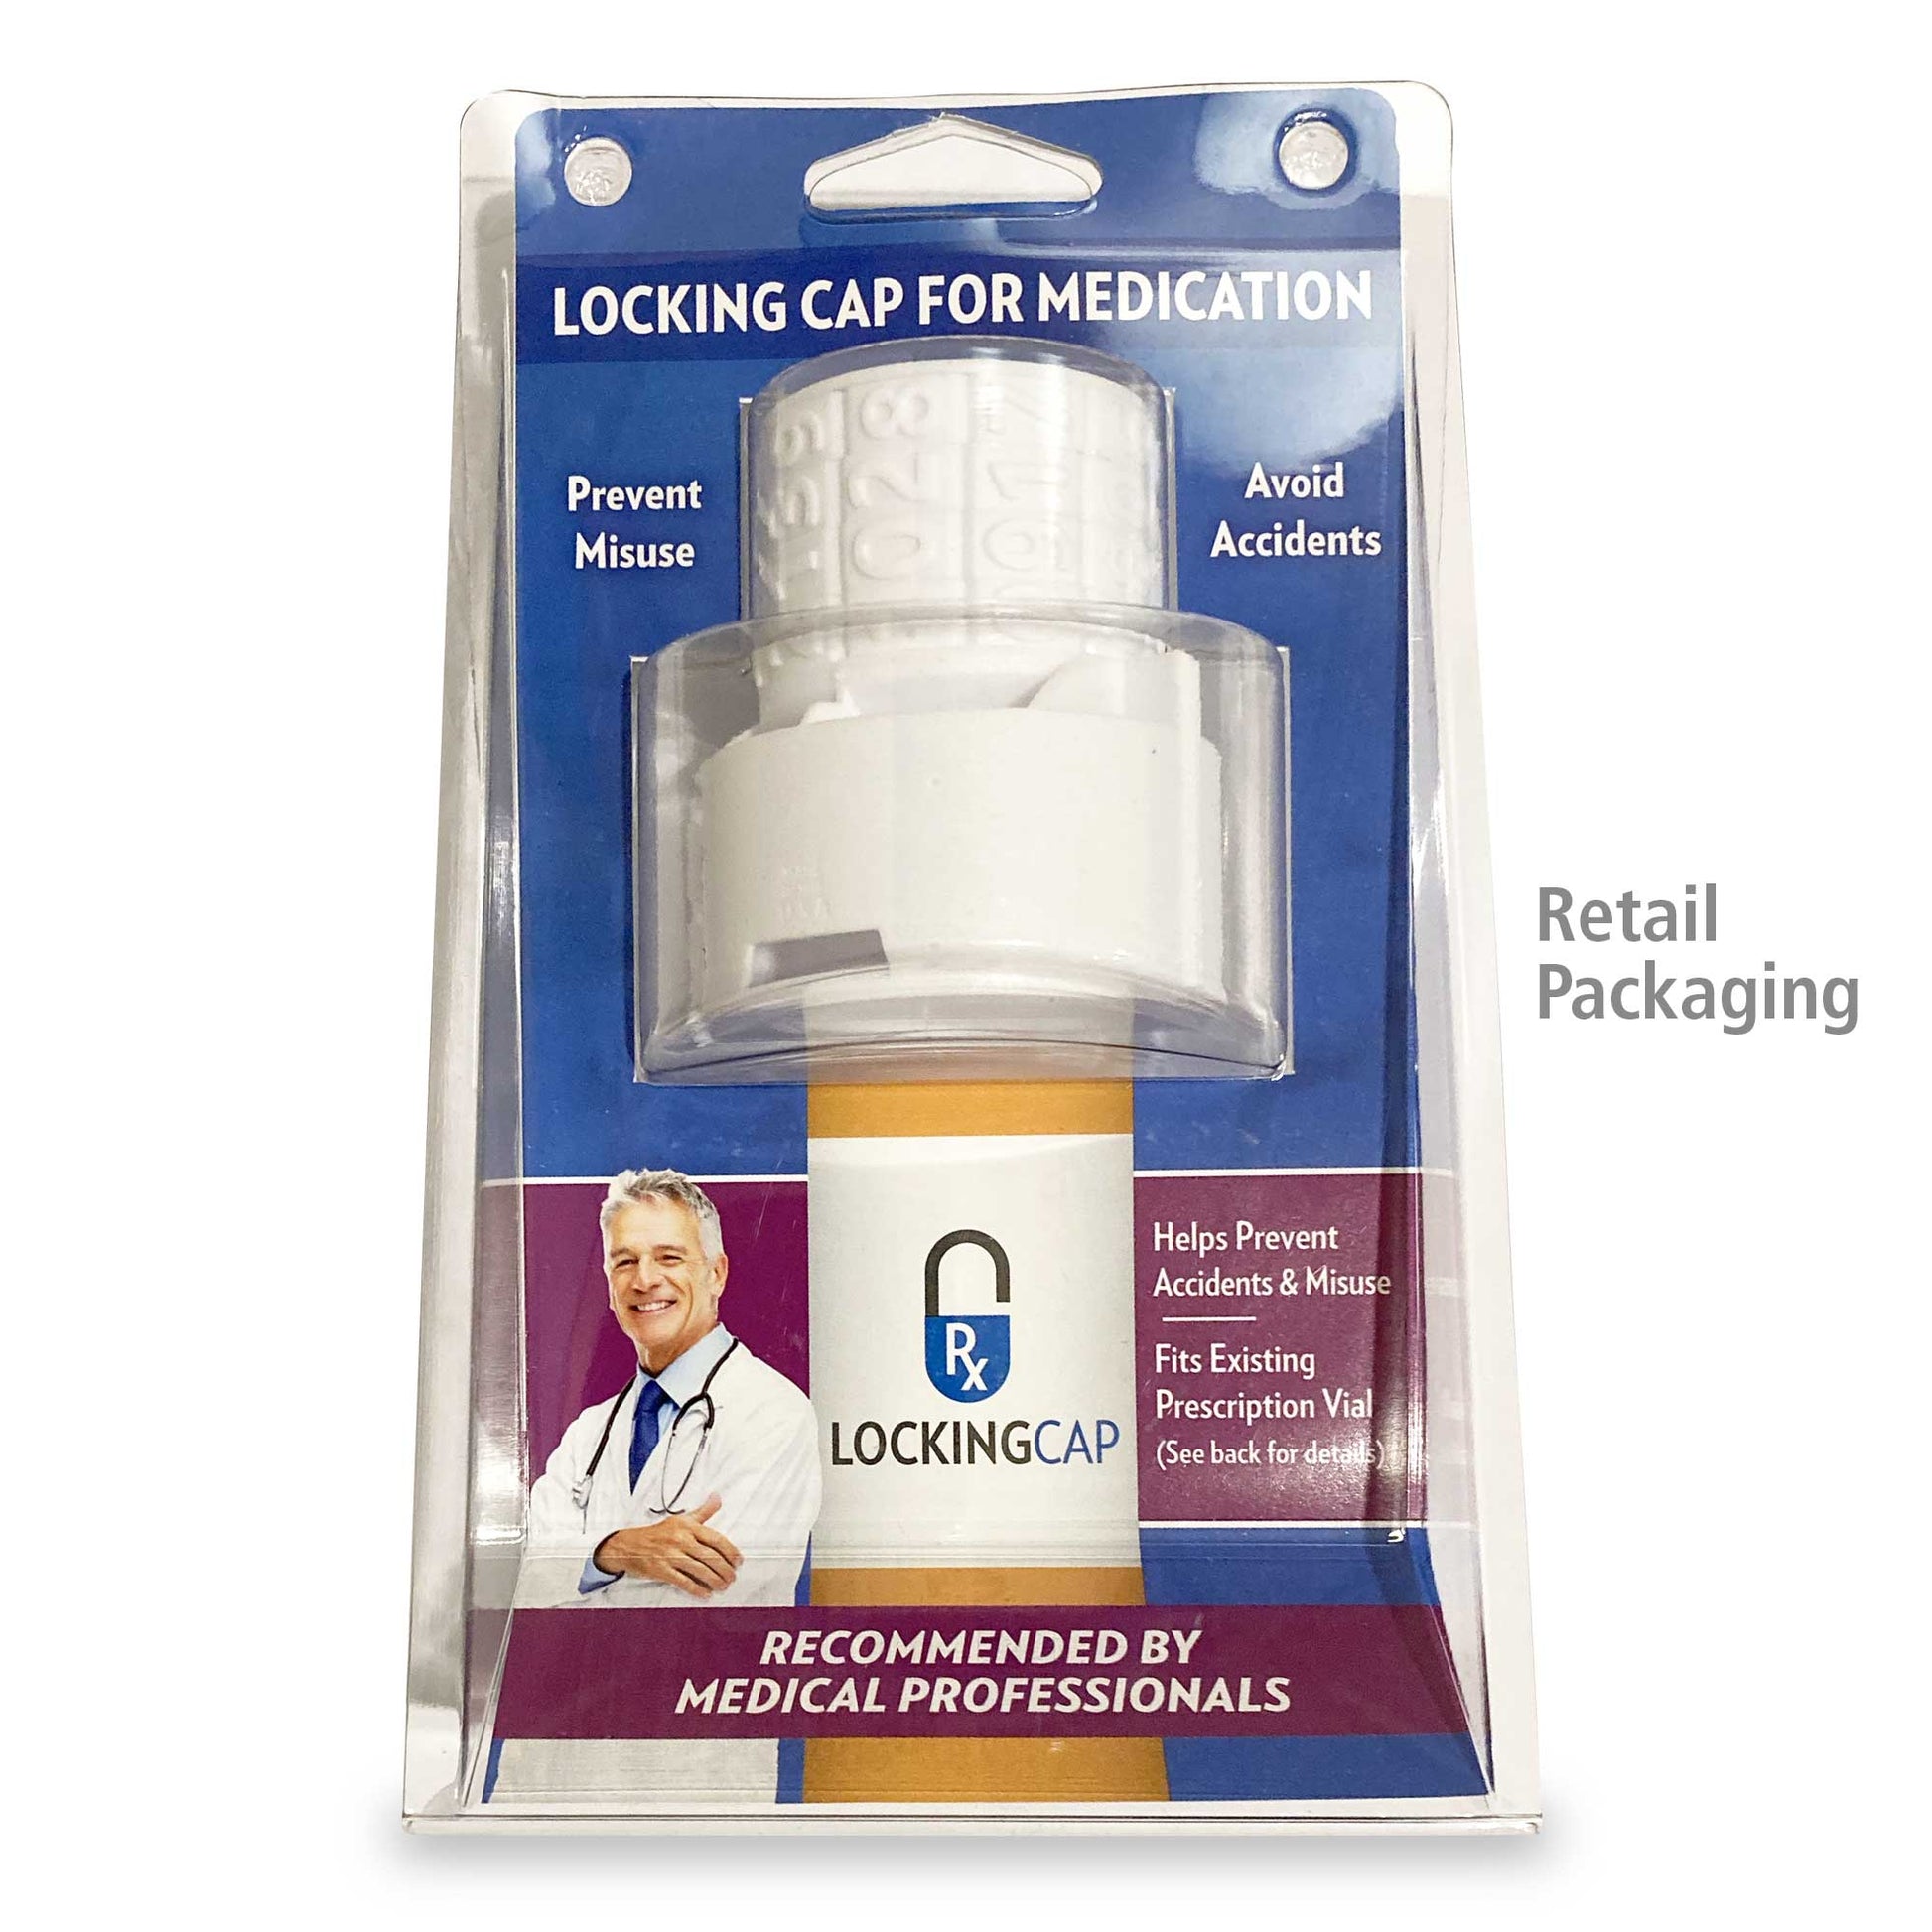 The Rx Locking Cap is shown in its retail packaging. It's wrapped in plastic with the text "Locking Cap for Medication. Prevent Misuse, Avoid Accidents."